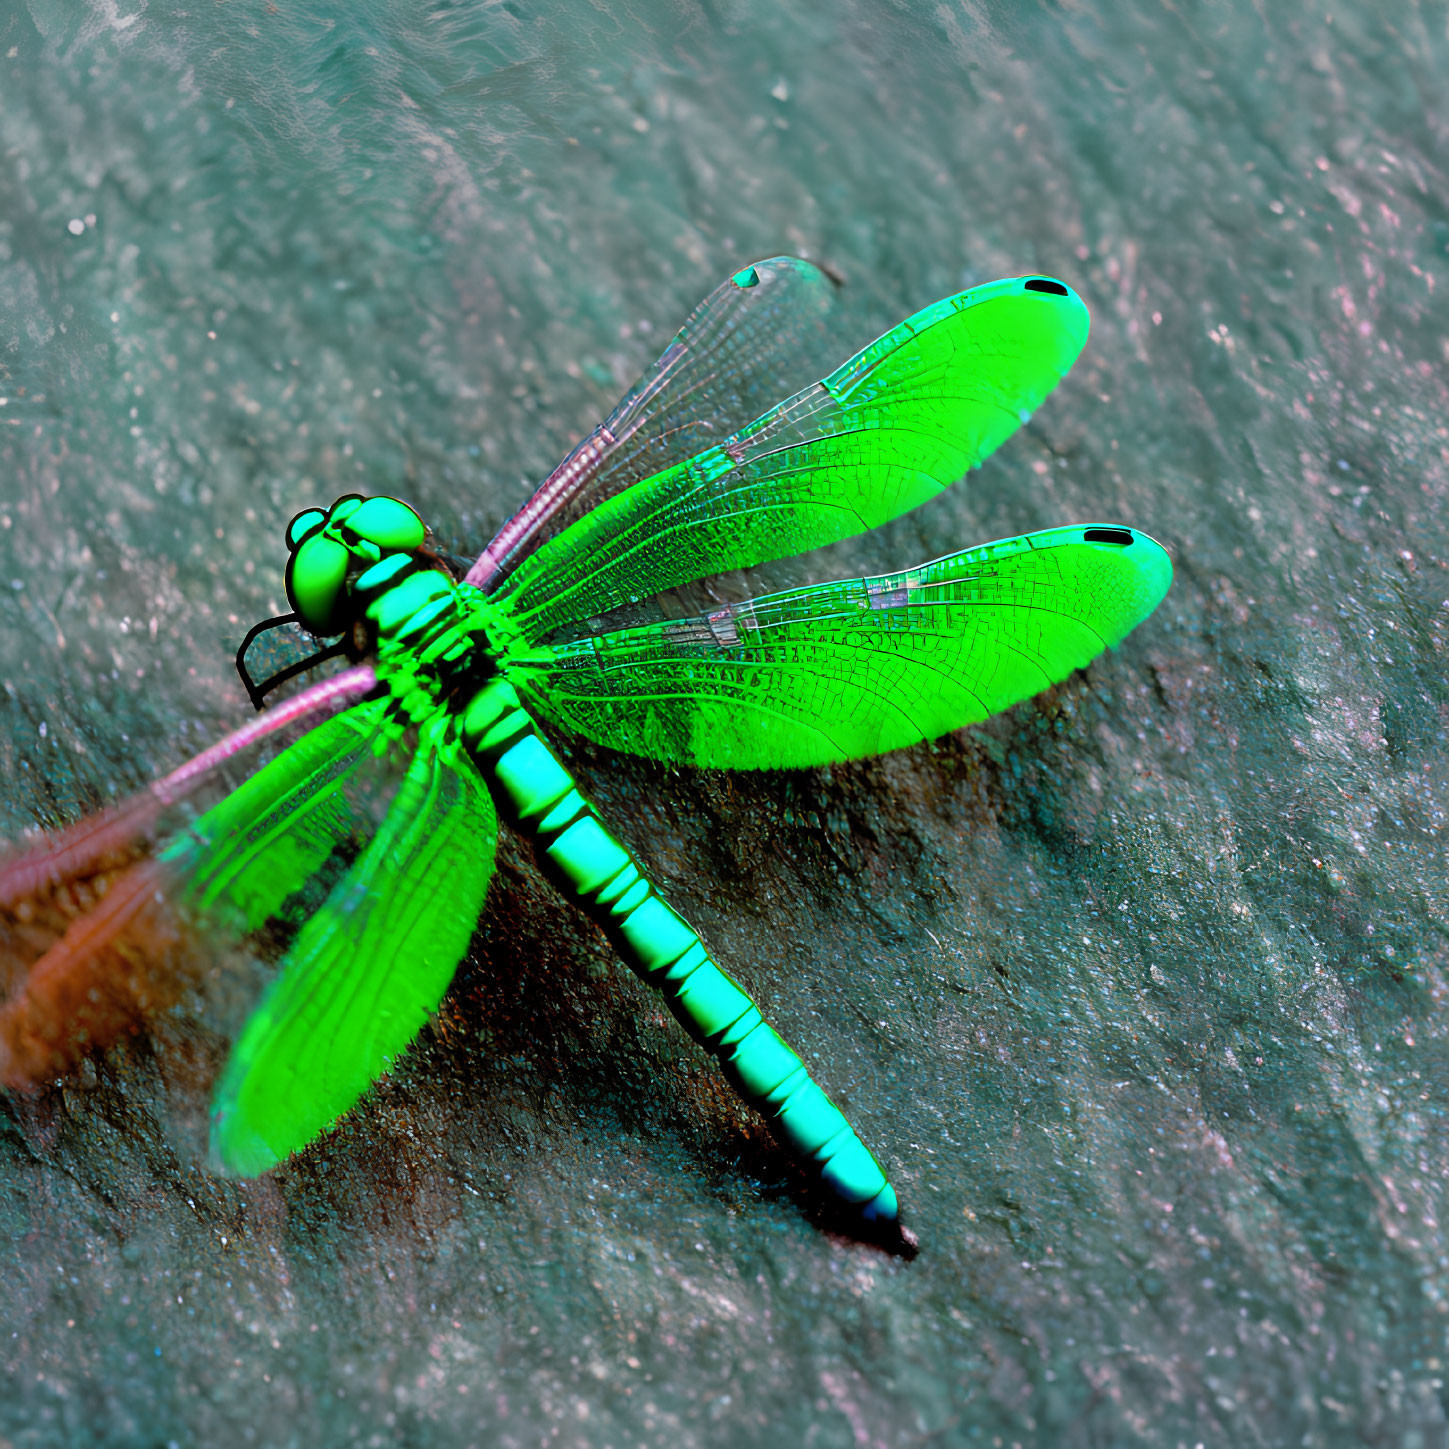 Colorful Dragonfly with Translucent Wings on Textured Surface